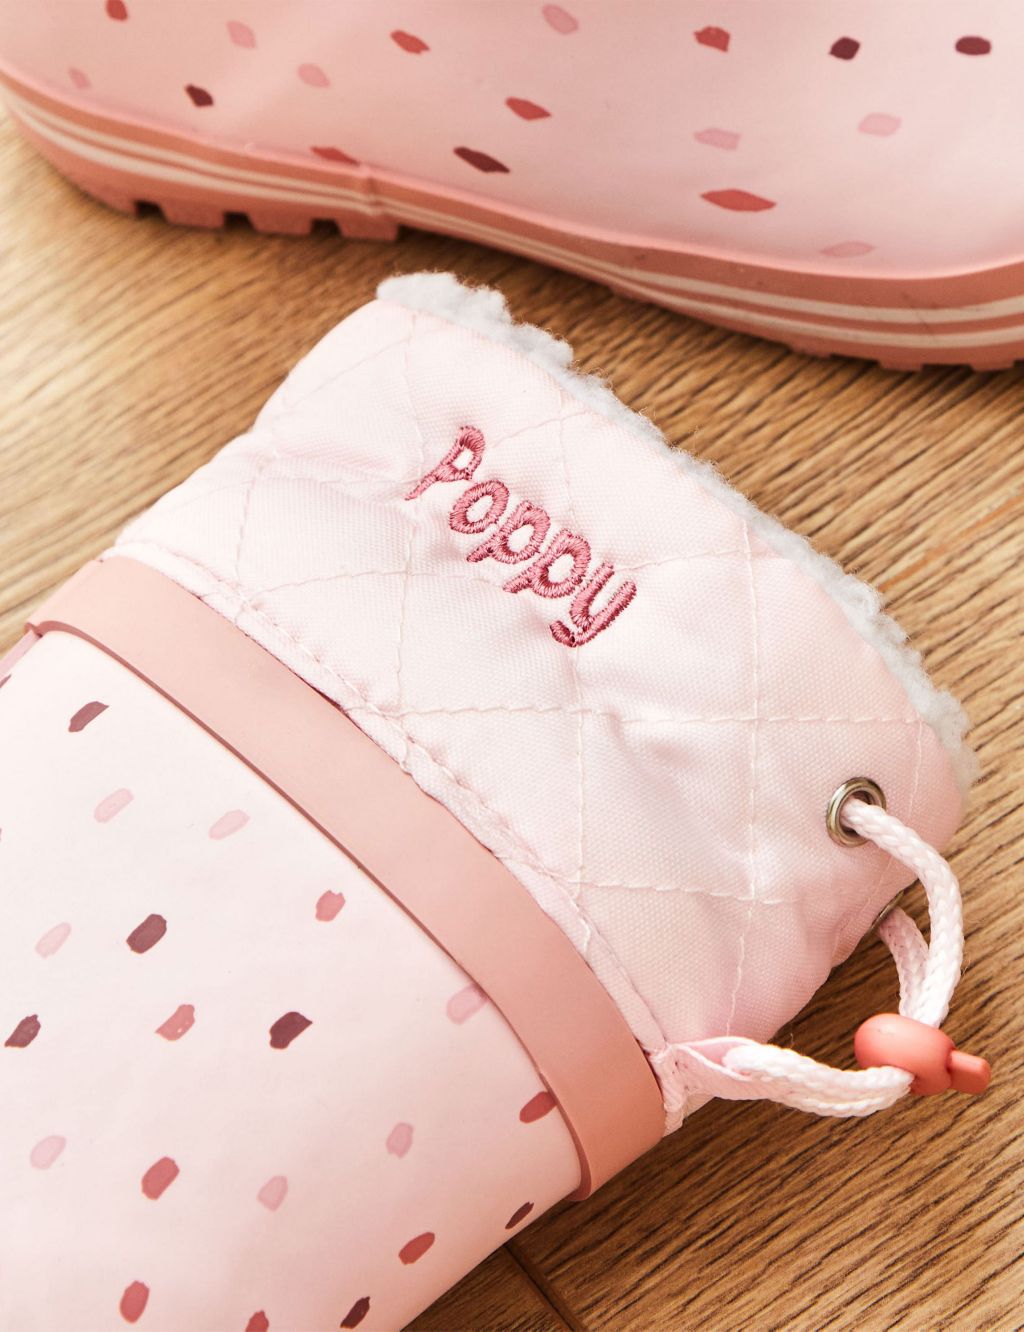 Personalised Pink Spot Wellies (4 Small-10 Small) 1 of 3